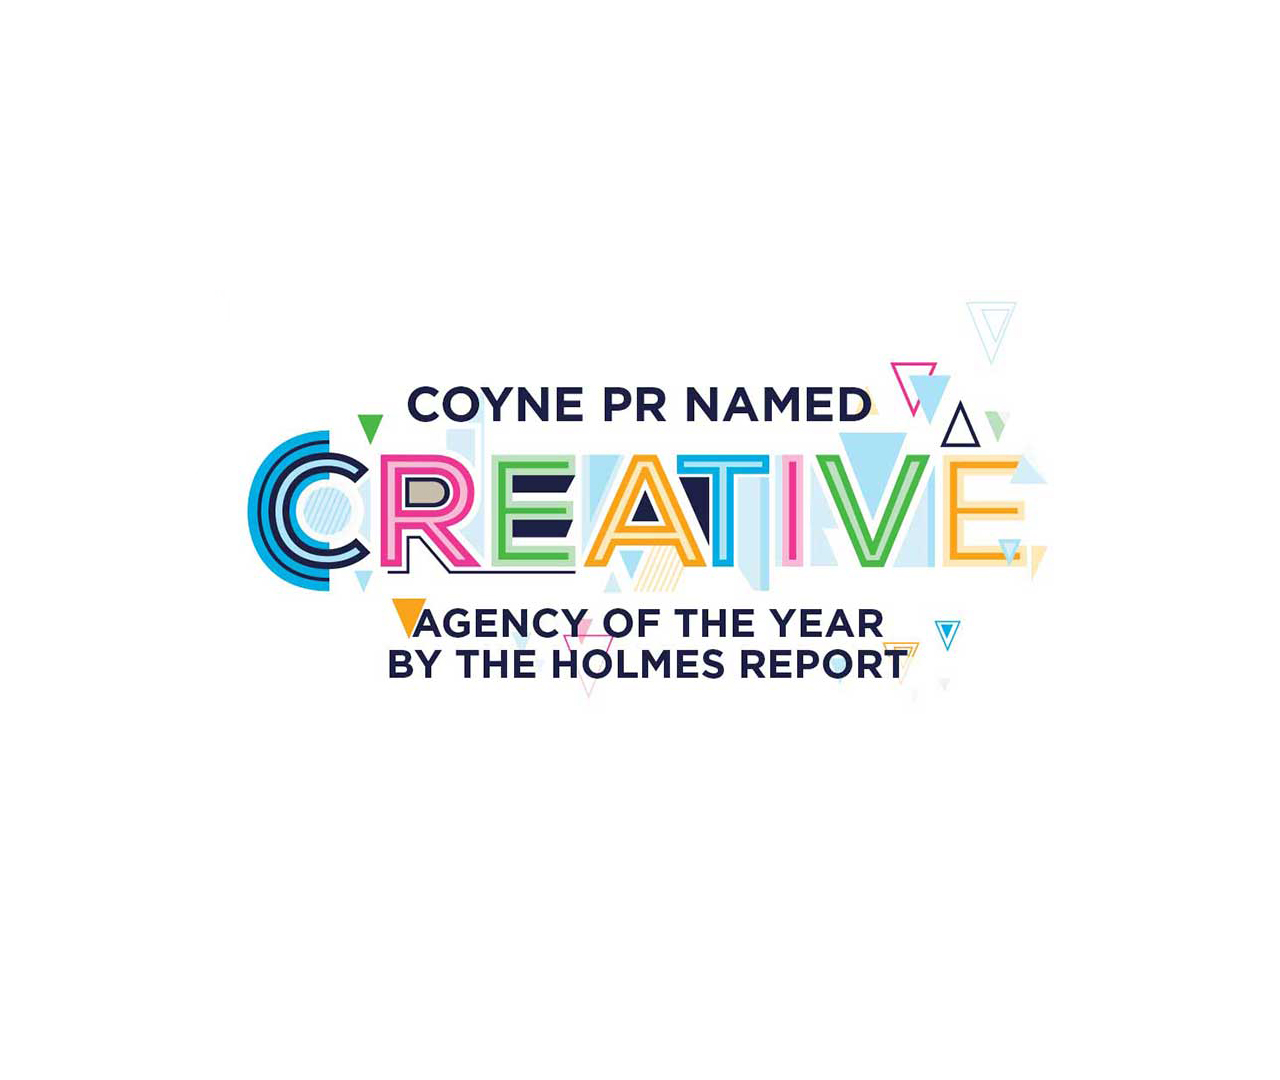 Coyne PR Named 2019 Creative Agency of the Year by The Holmes Report